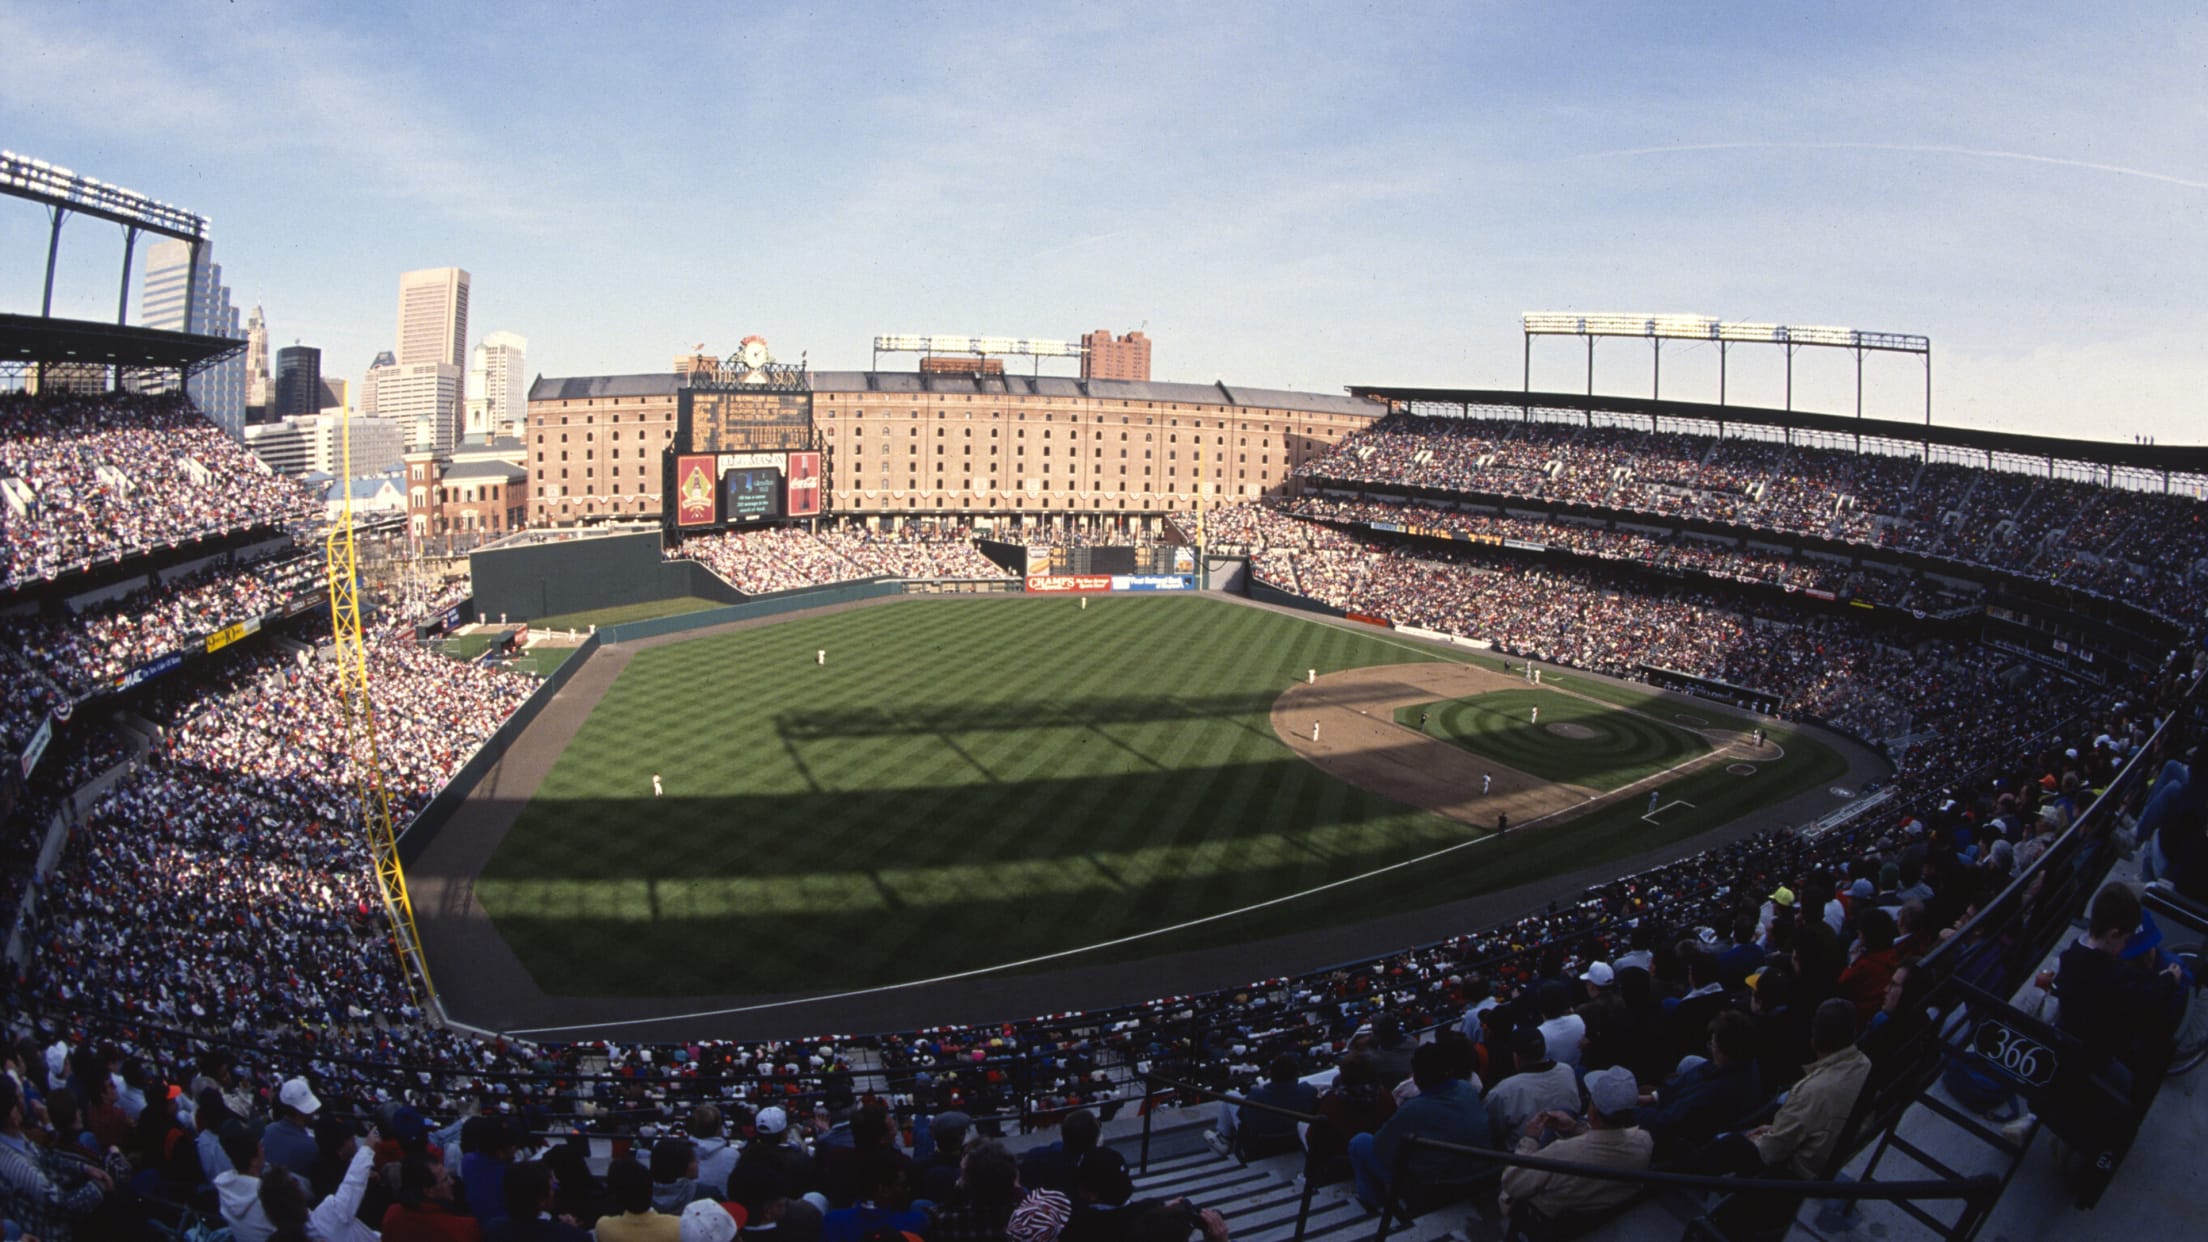 Oriole Park at Camden Yards: History, Capacity, Events & Significance